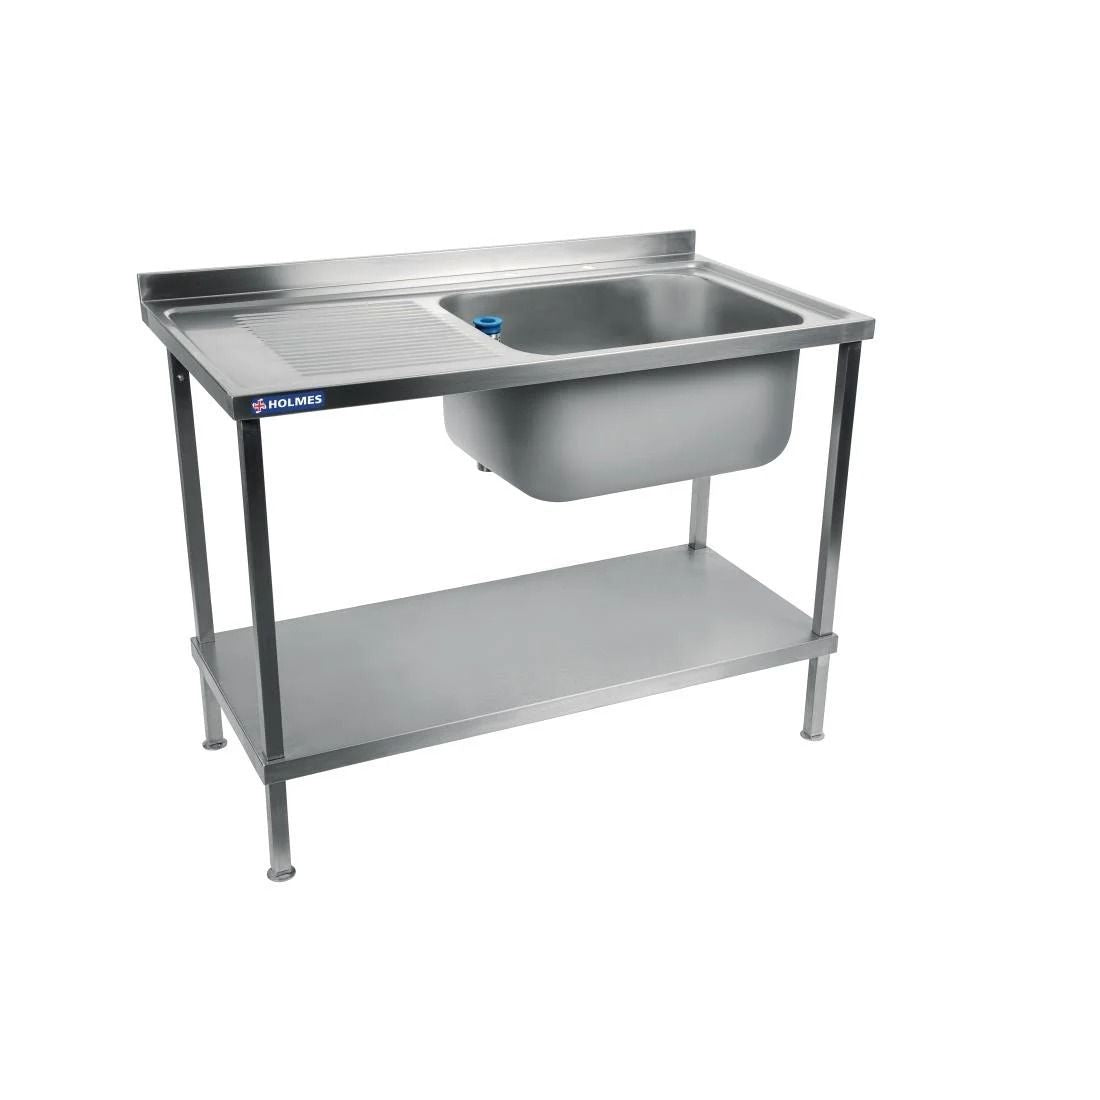 Holmes Self Assembly Stainless Steel Sink Left Hand Drainer 1200mm - DR367